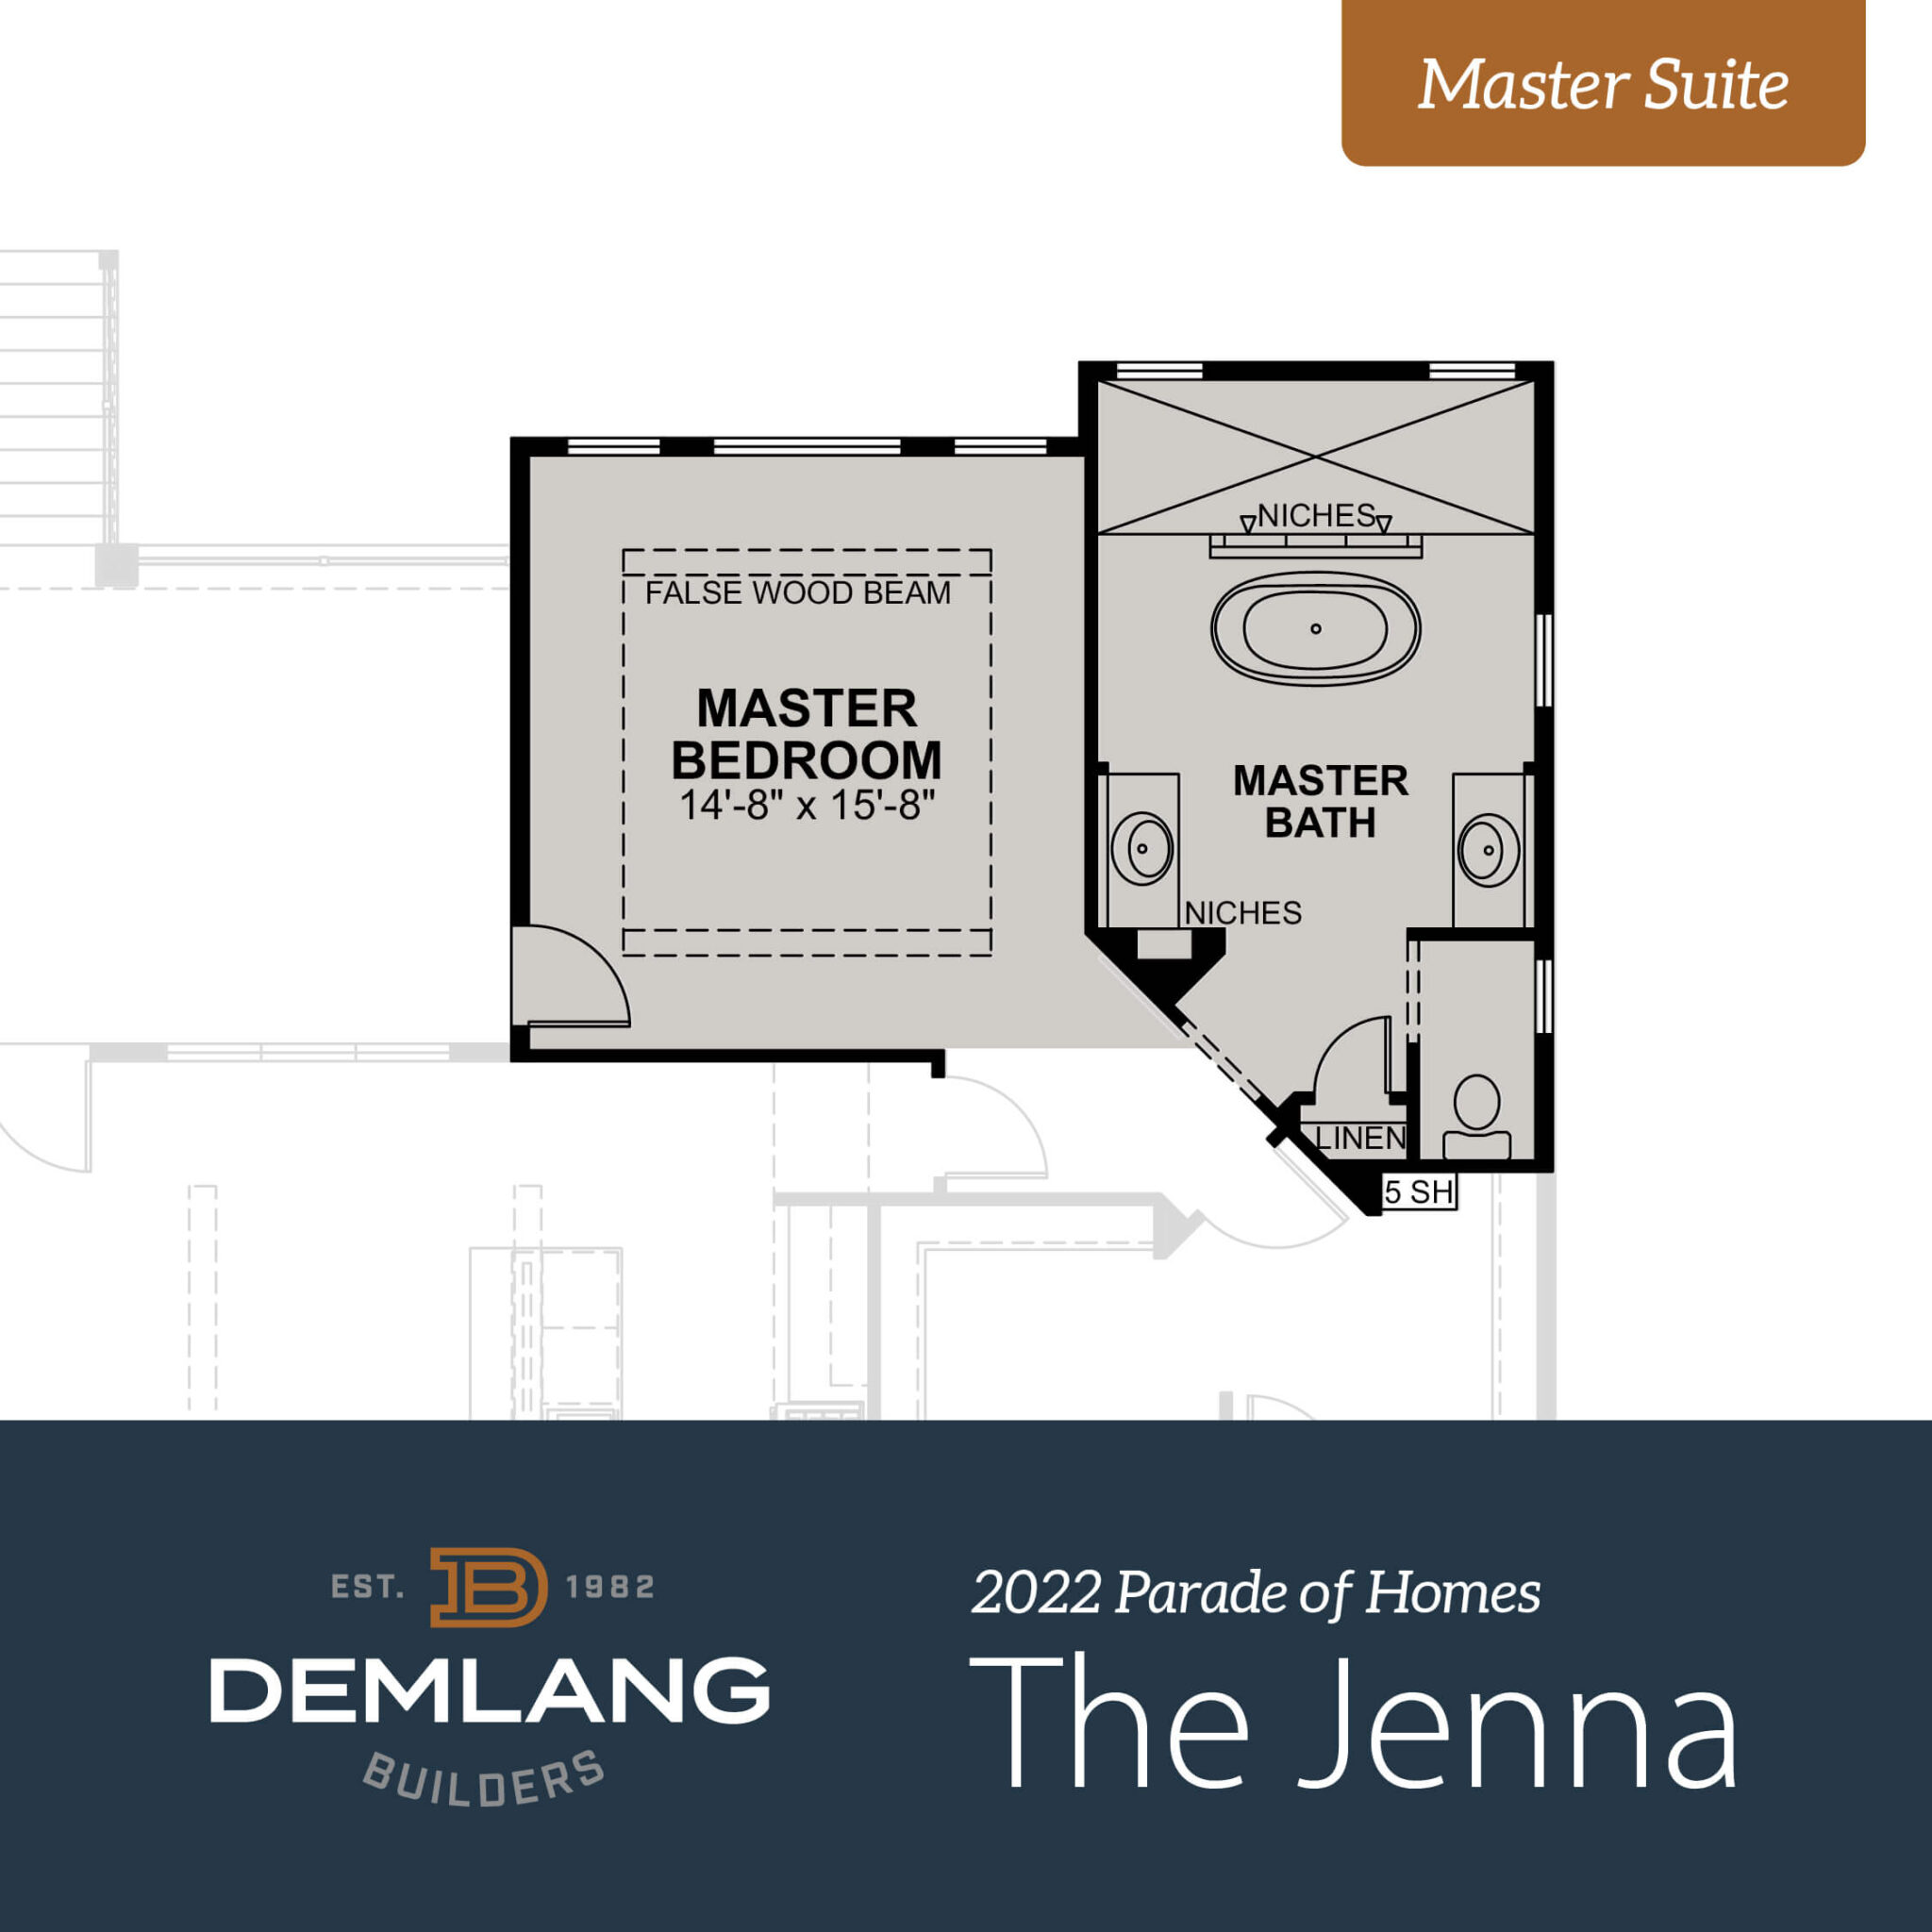 Parade of Homes Master Suite Reveal